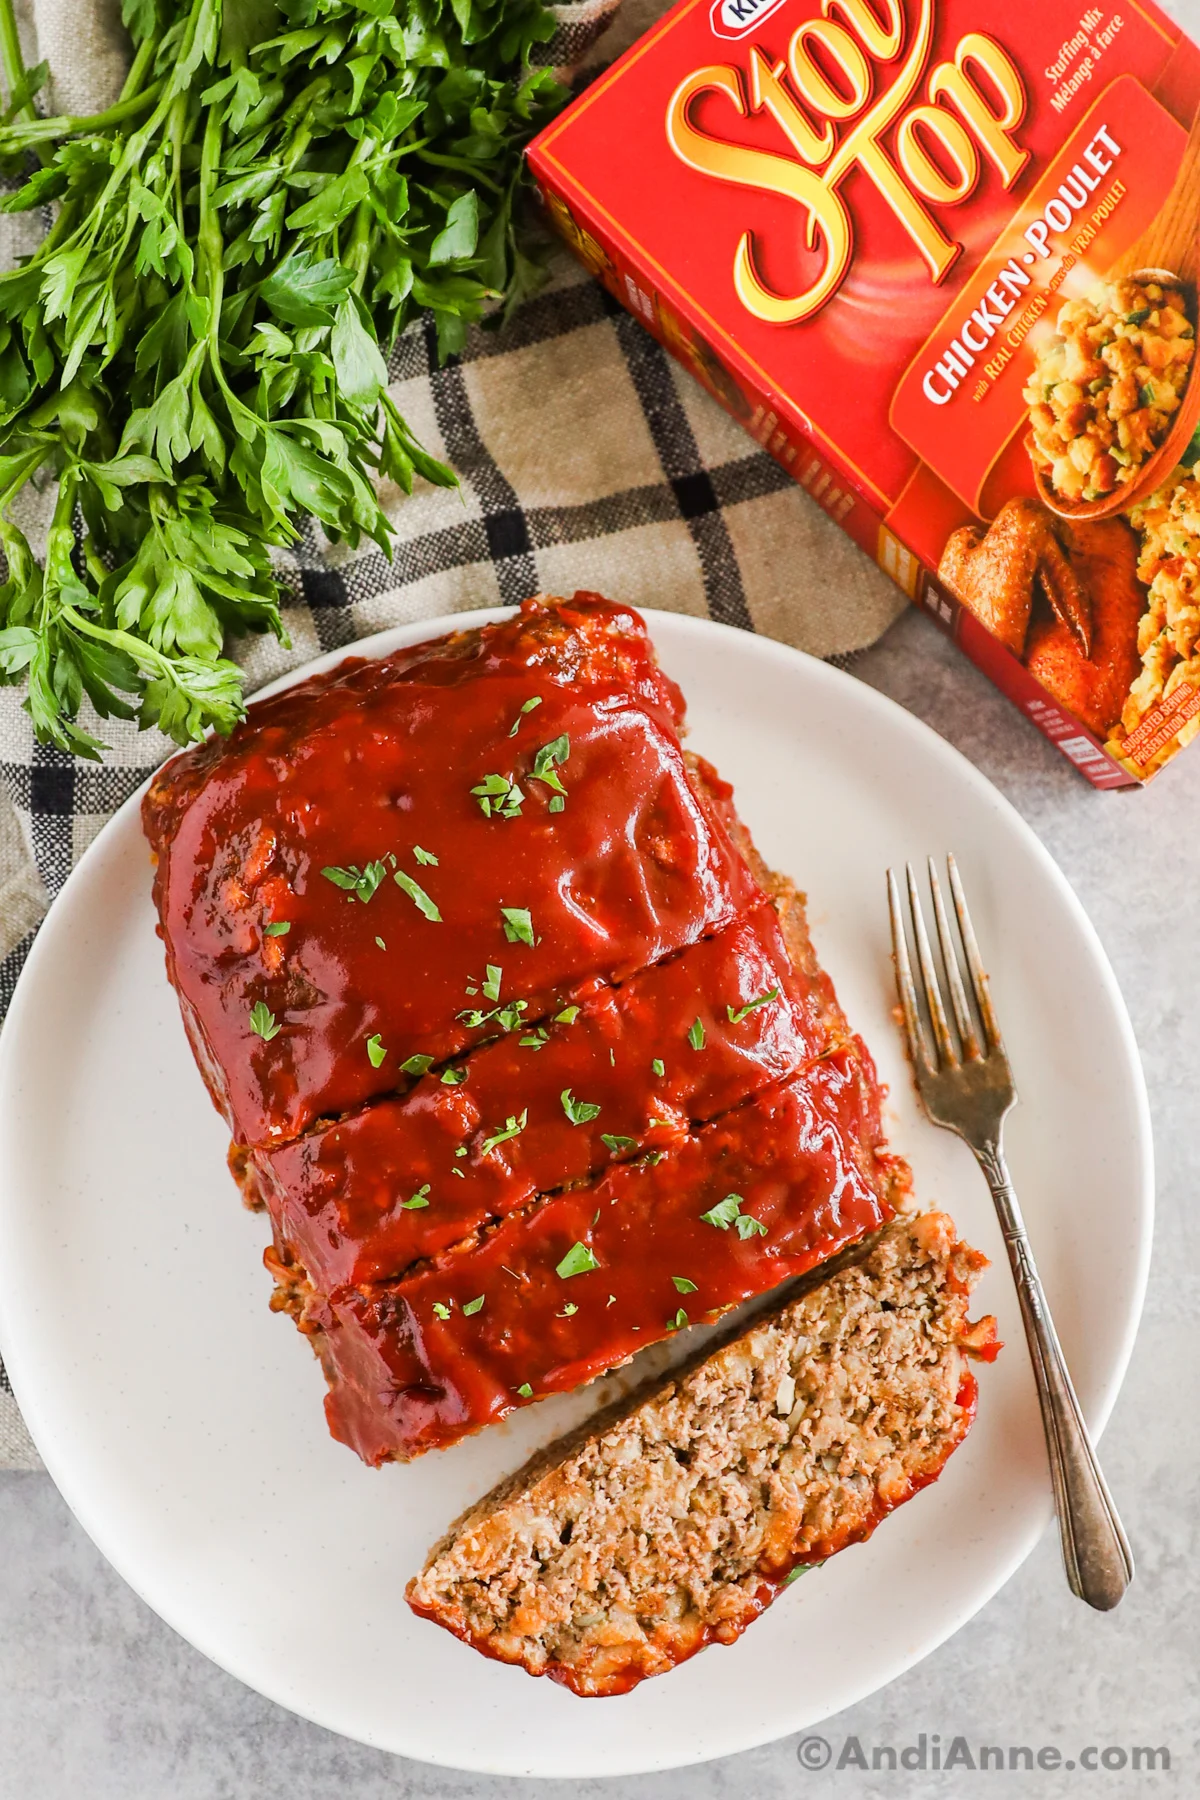 Stove top stuffing meatloaf with box of stove top and parsley in the background.